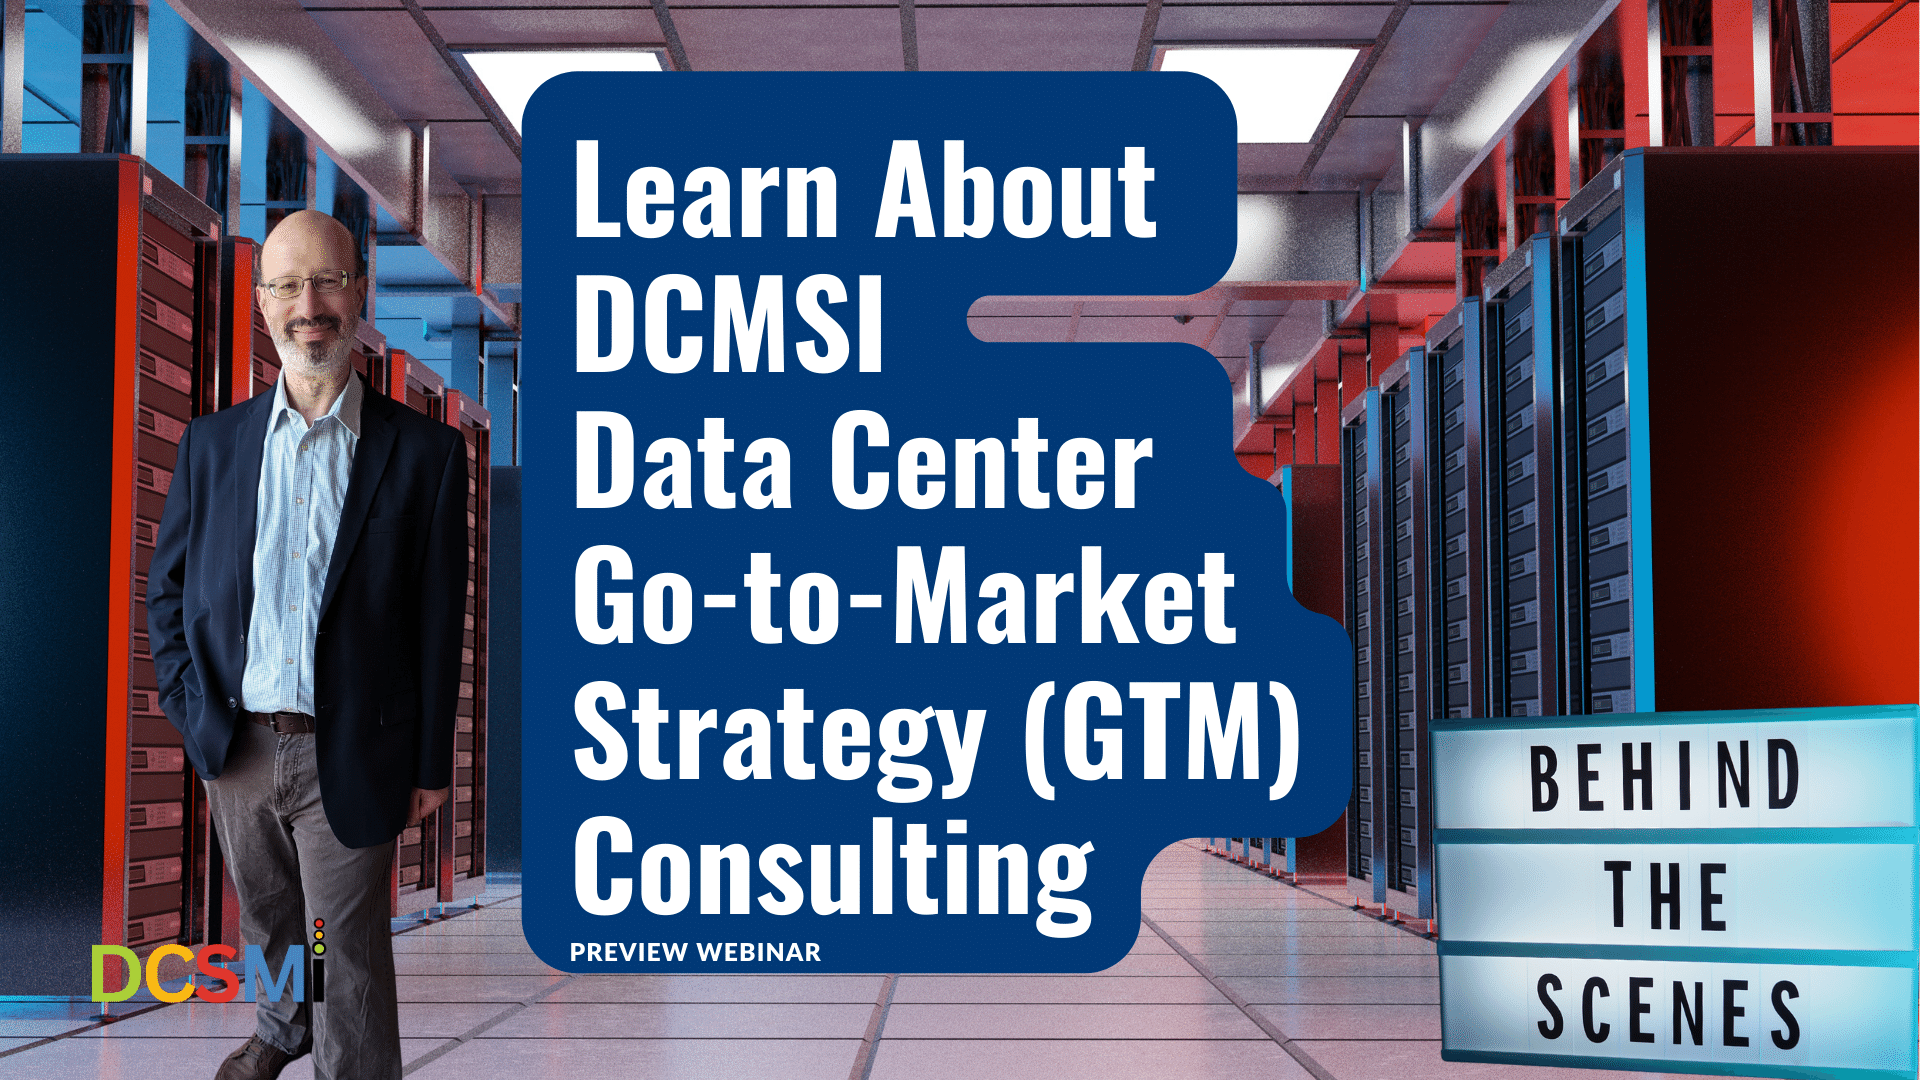 Learn About DCMSI Data Center Go-to-Market Strategy (GTM) Consulting